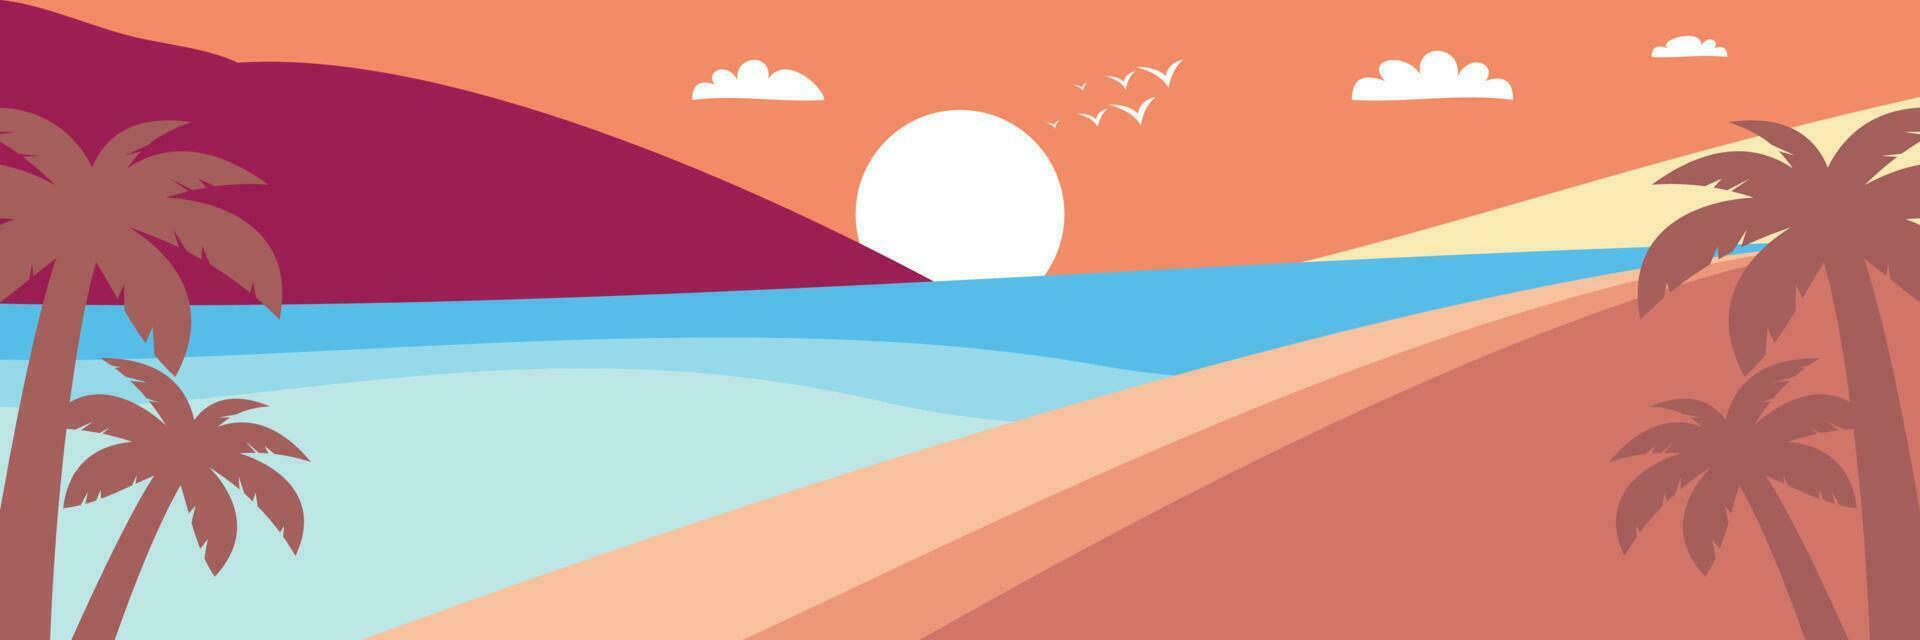 colorful summer background with sunset shades and palm tree icons. vector illustration for promotional banners, greeting cards, posters, social media and web.